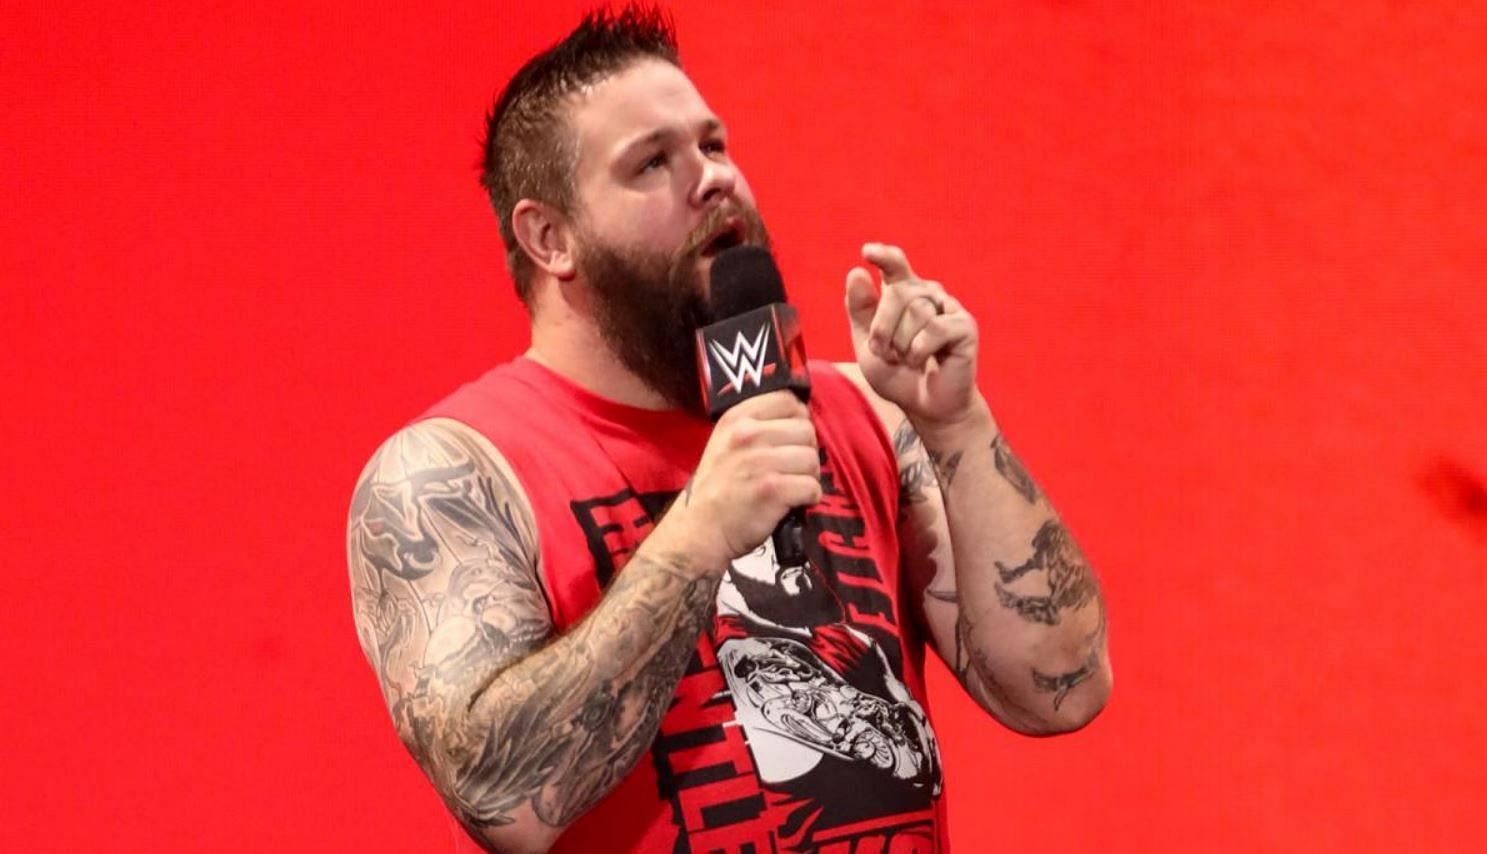 Kevin Owens would be an excellent opponent for Tyson Fury